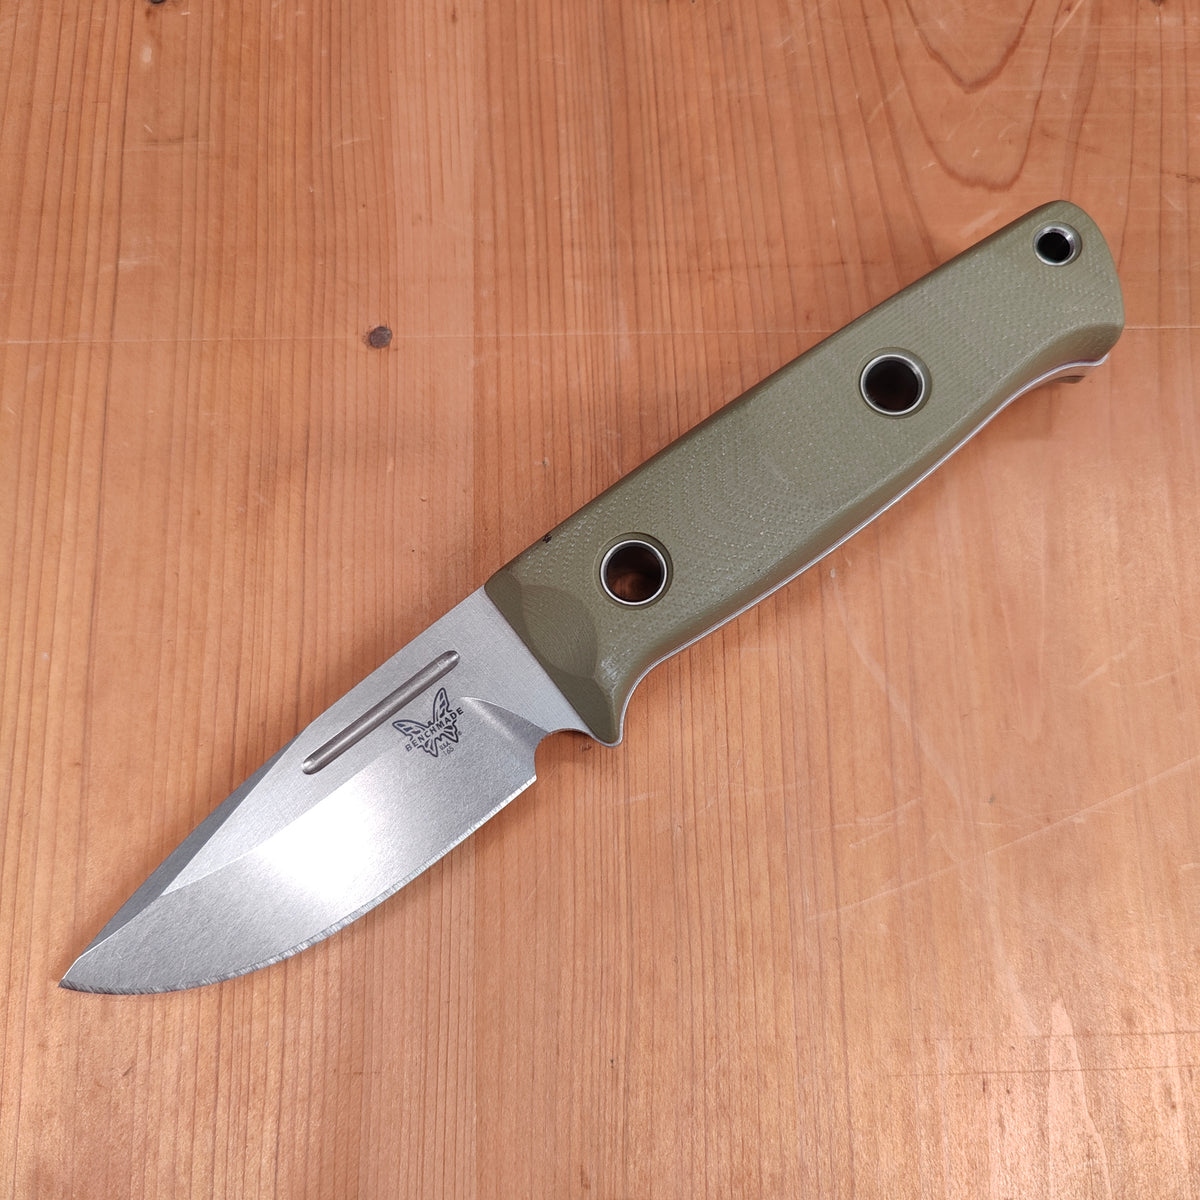 Benchmade 165-1 Mini Bushcrafter Drop Point OD Green G10 with Leather Sheath